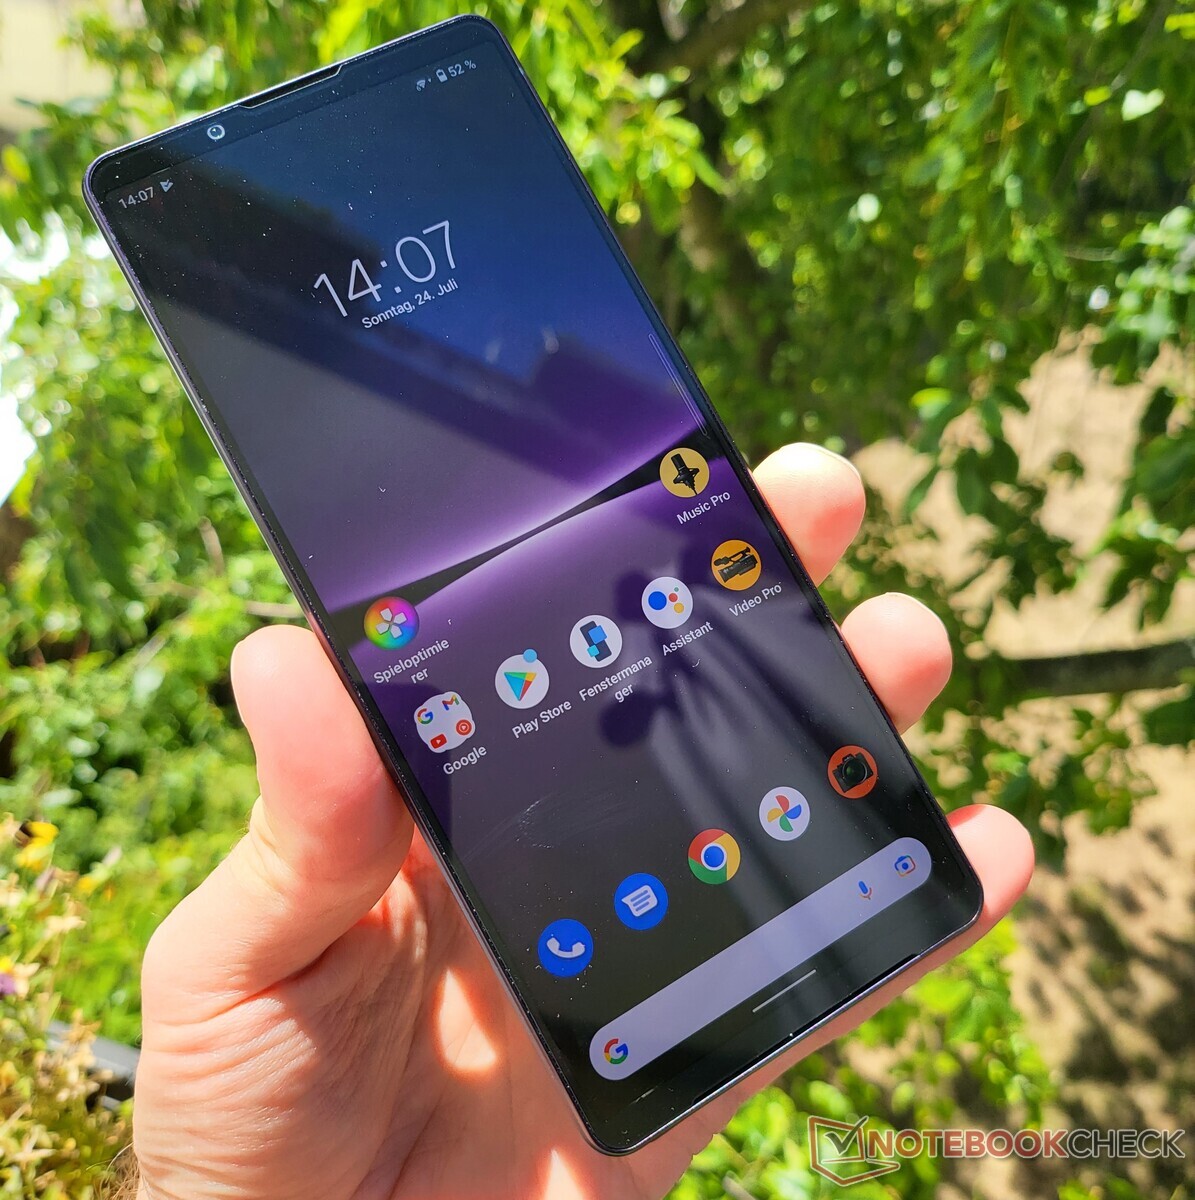 Sony Xperia 1 IV Review: An Absurdly Priced Android Phone